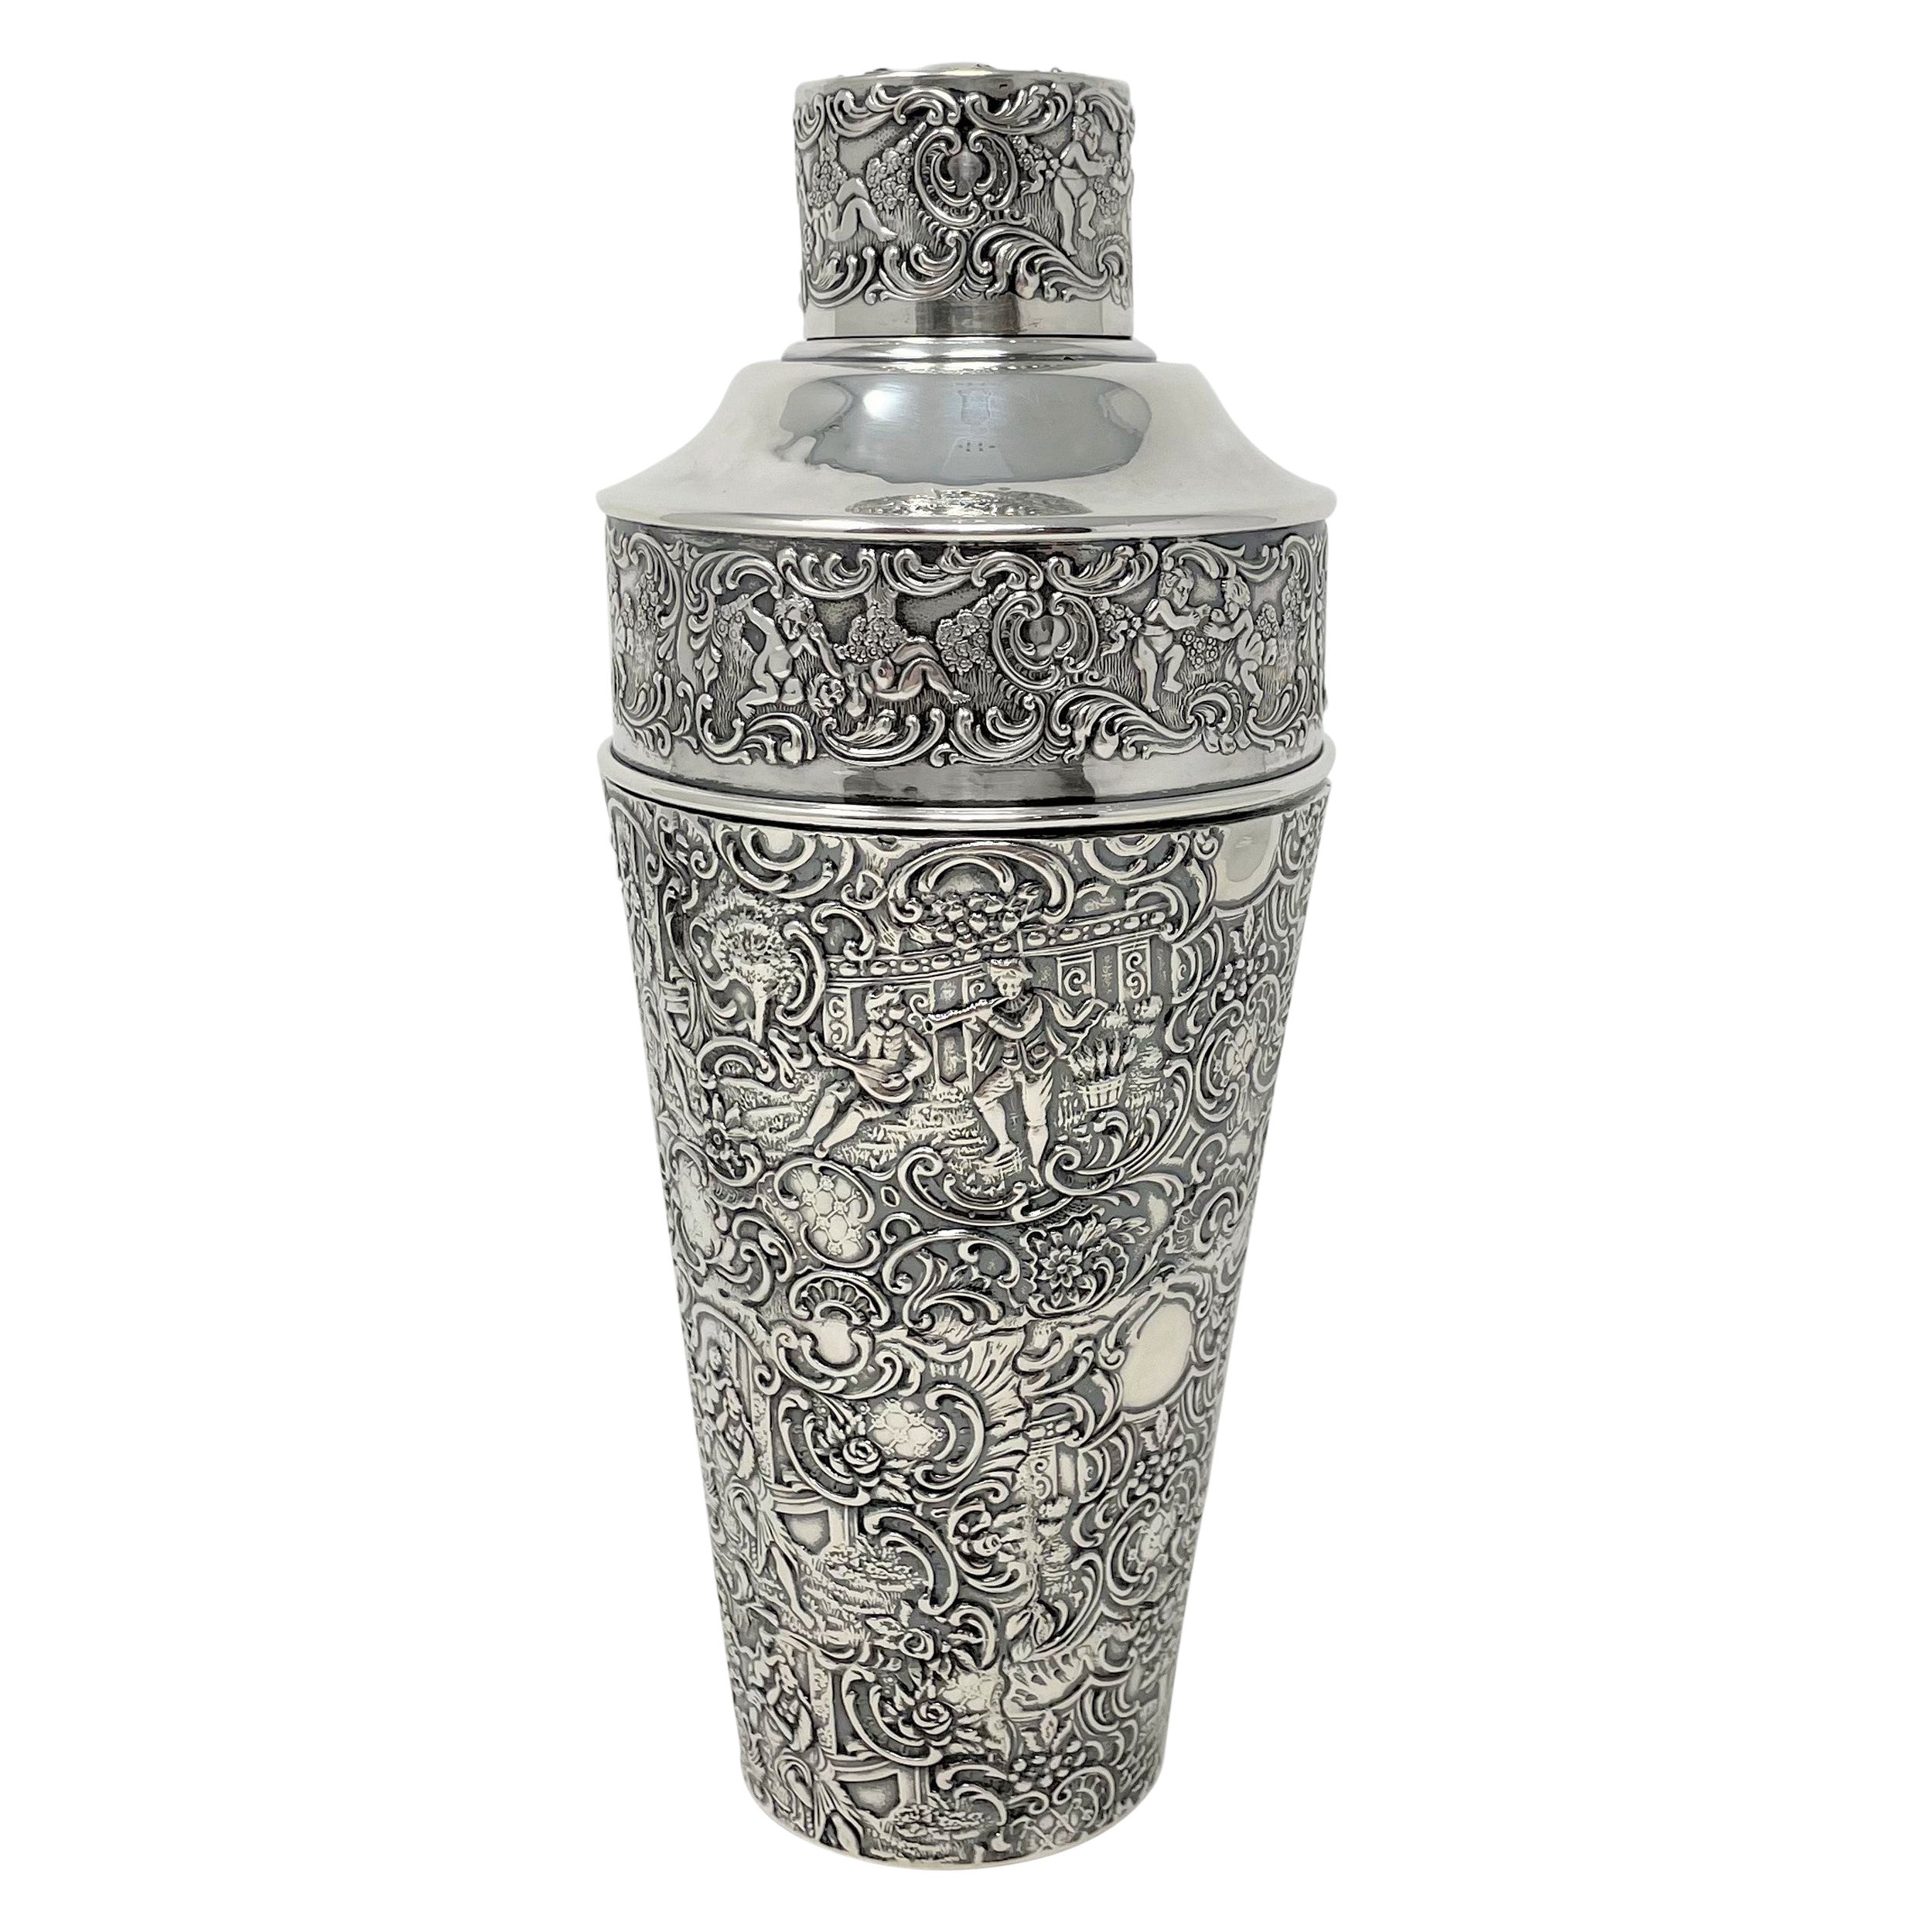 Antique American Repousse Sterling Silver Cocktail Shaker, Circa 1920's